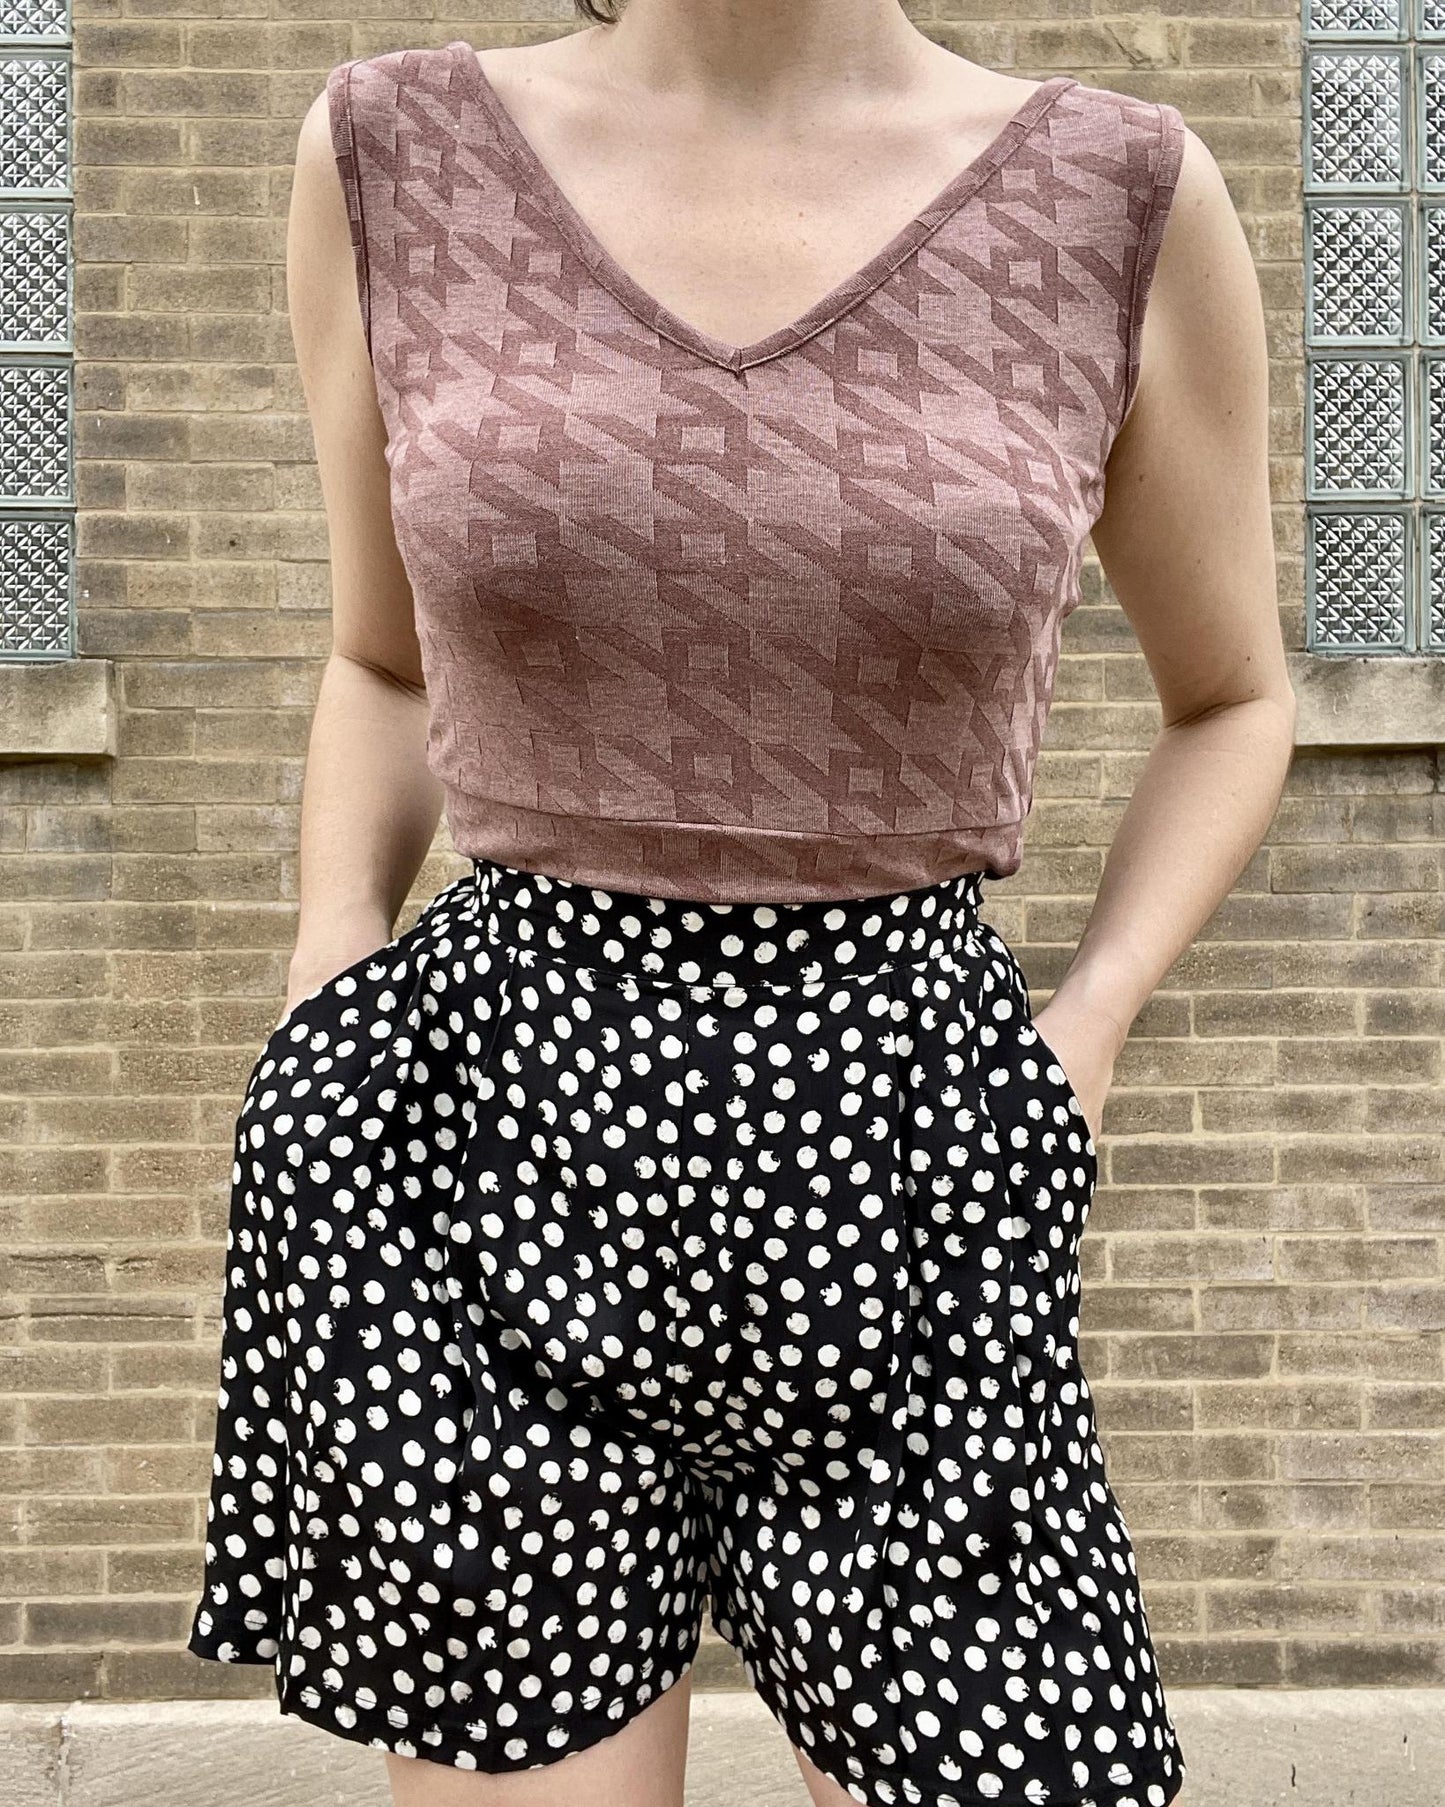 Squasht Ballet Top in Blush Pink Houndstooth